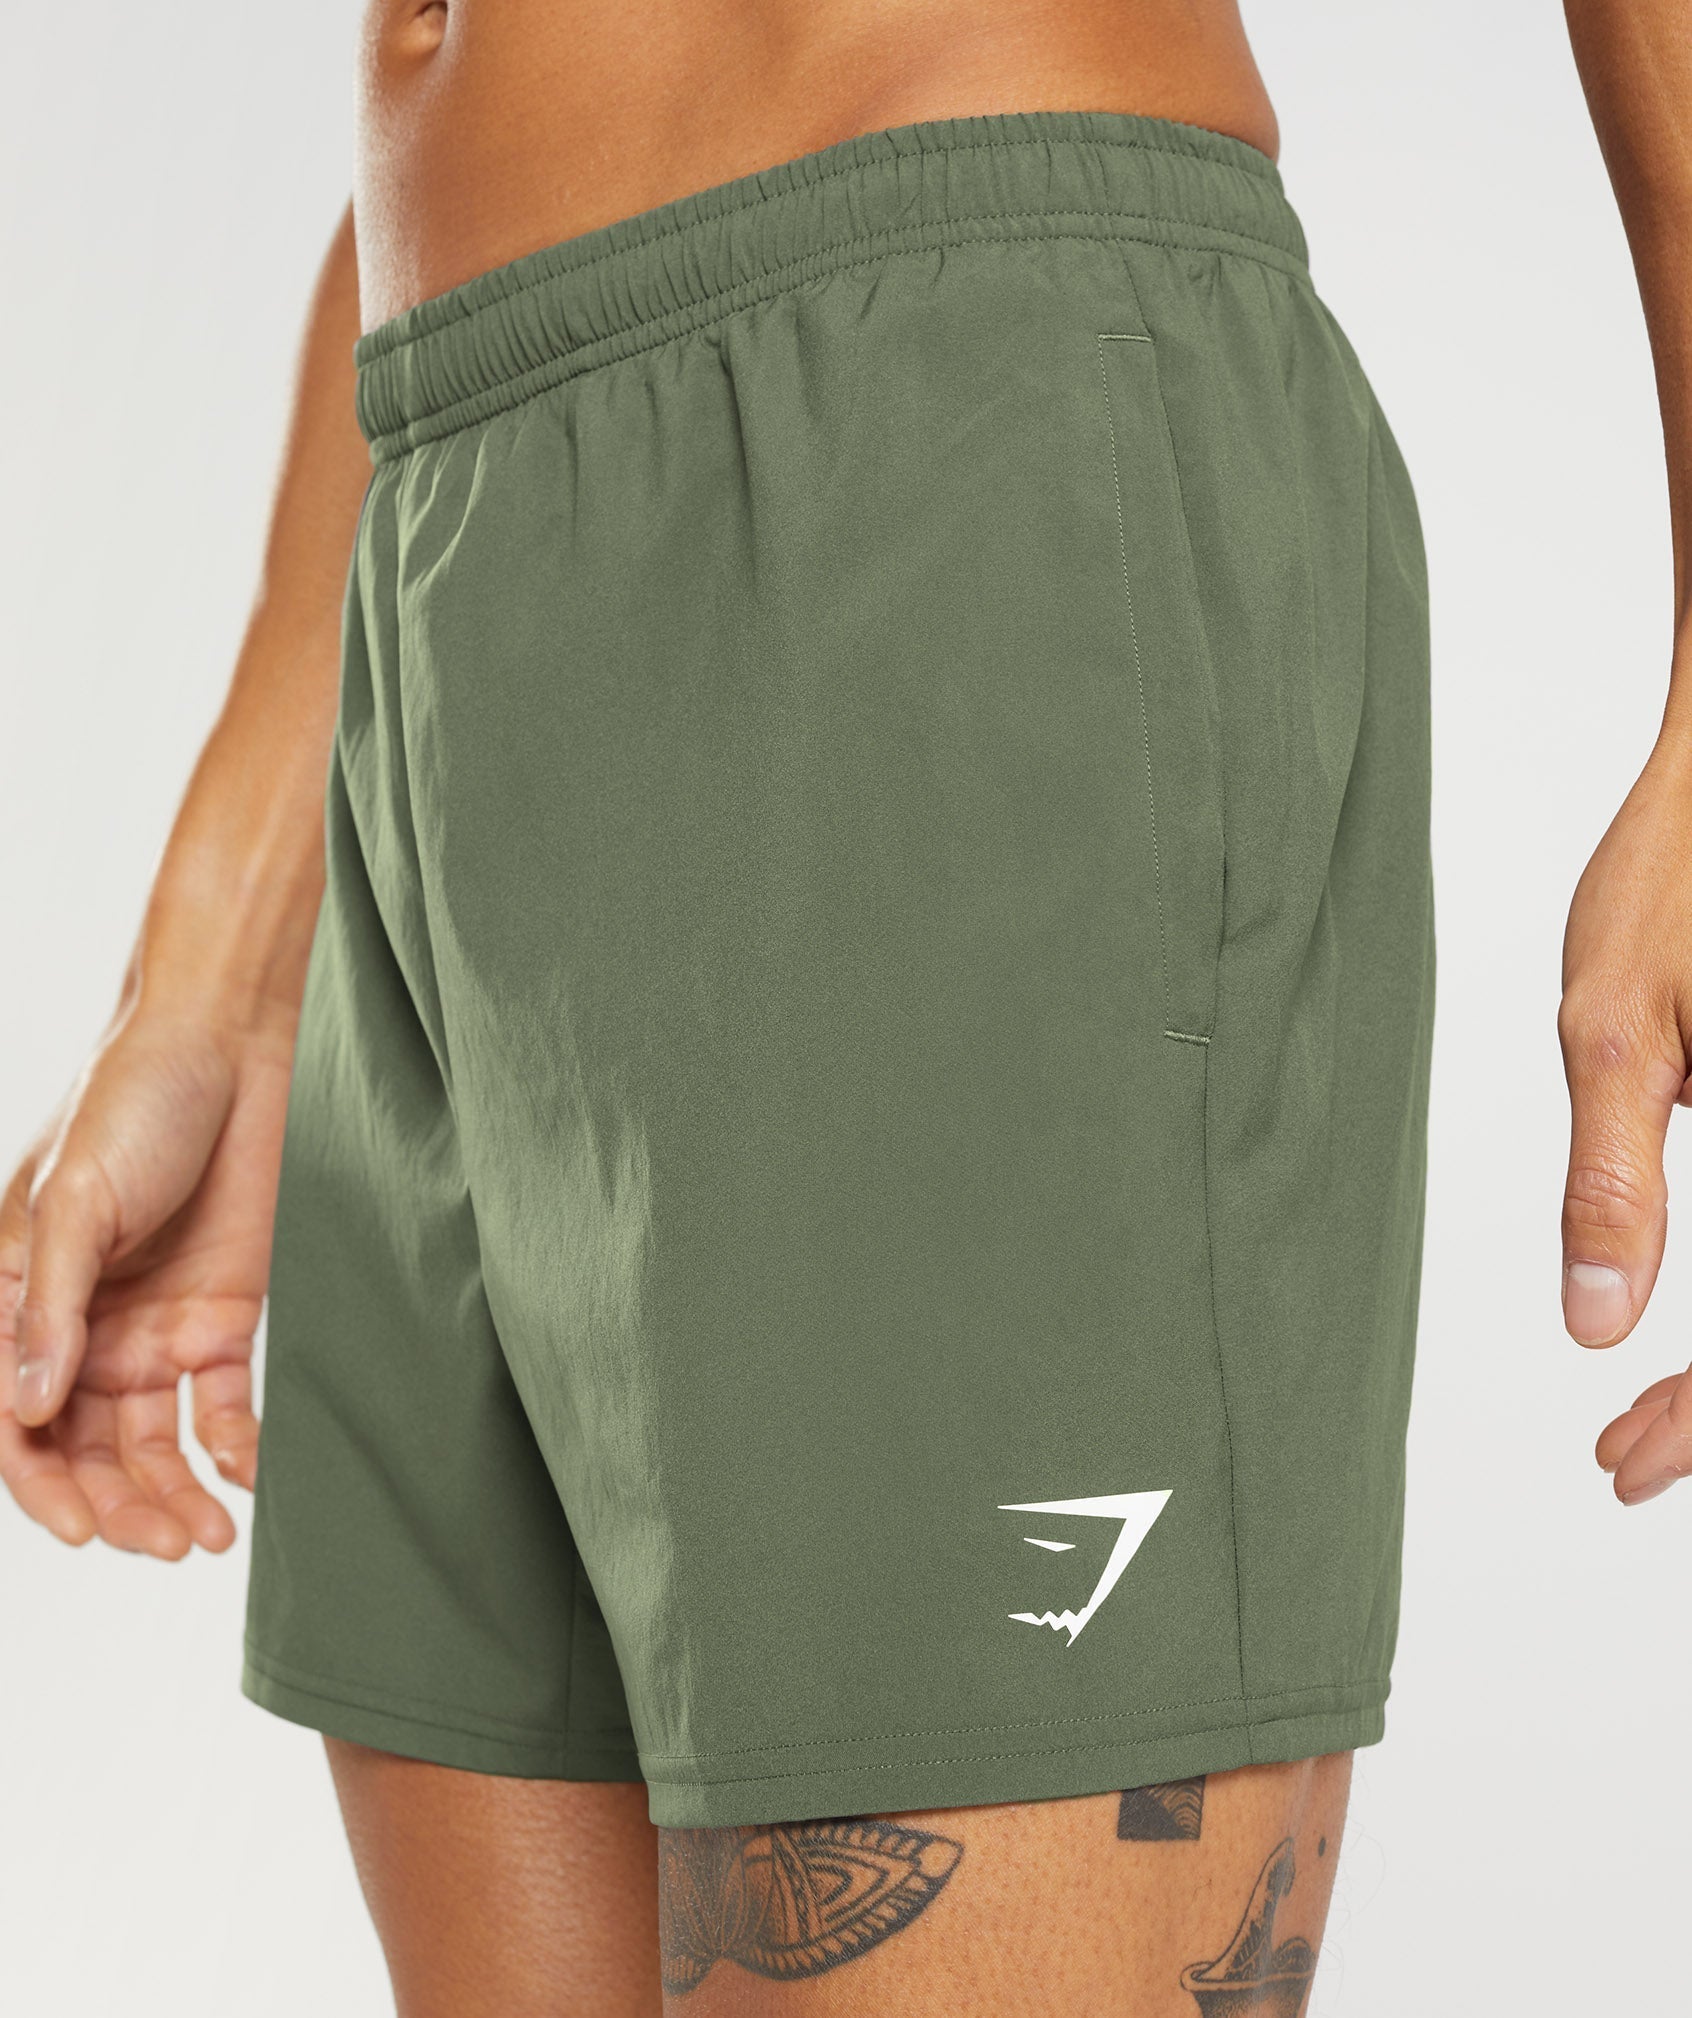 Arrival 5" Shorts in Core Olive